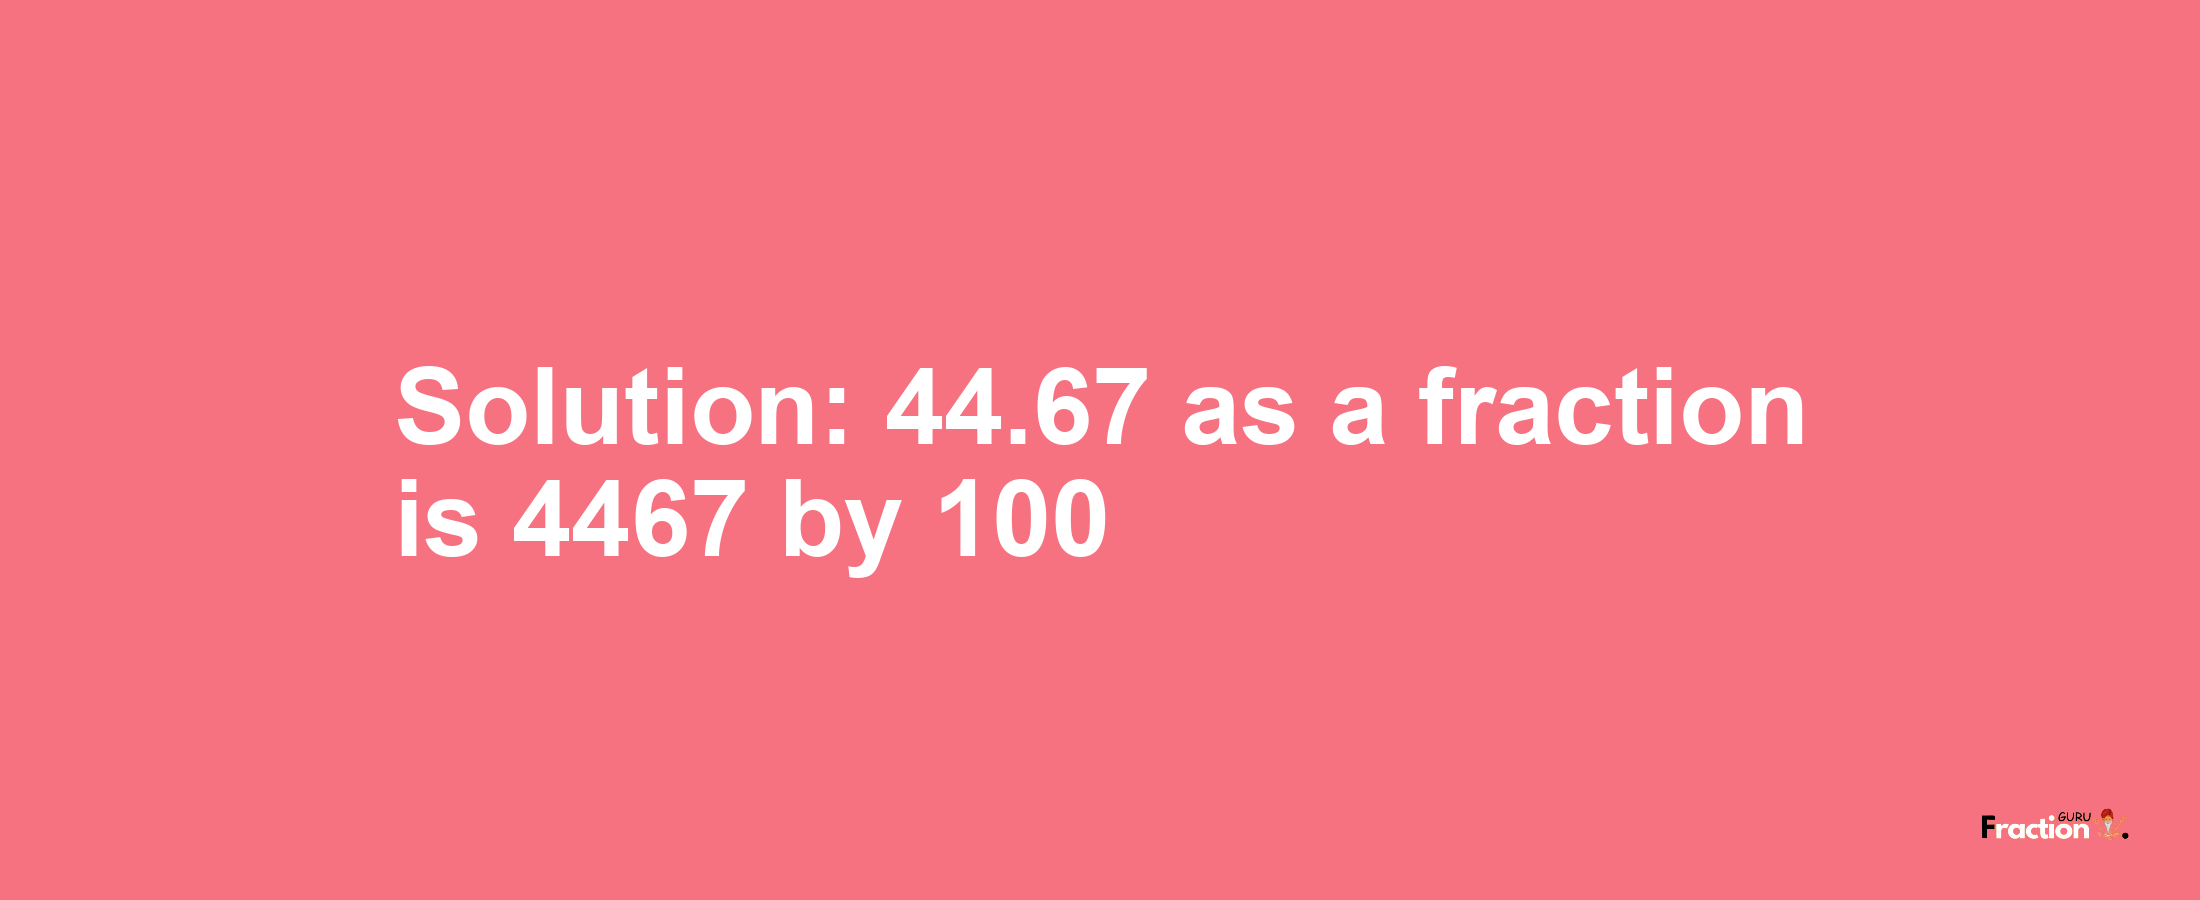 Solution:44.67 as a fraction is 4467/100